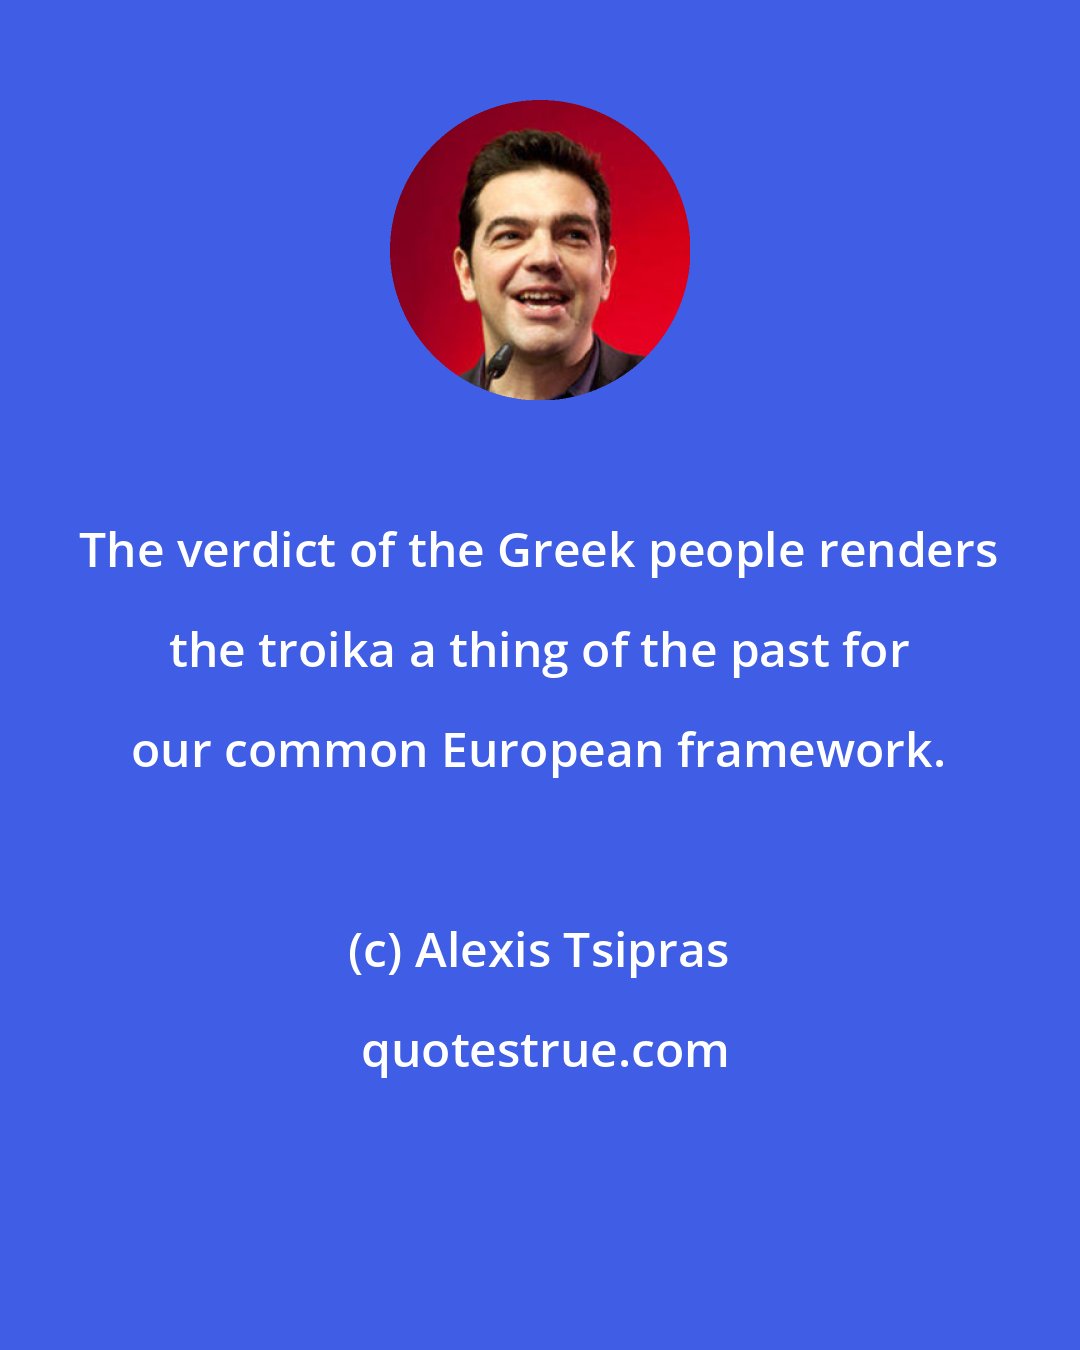 Alexis Tsipras: The verdict of the Greek people renders the troika a thing of the past for our common European framework.